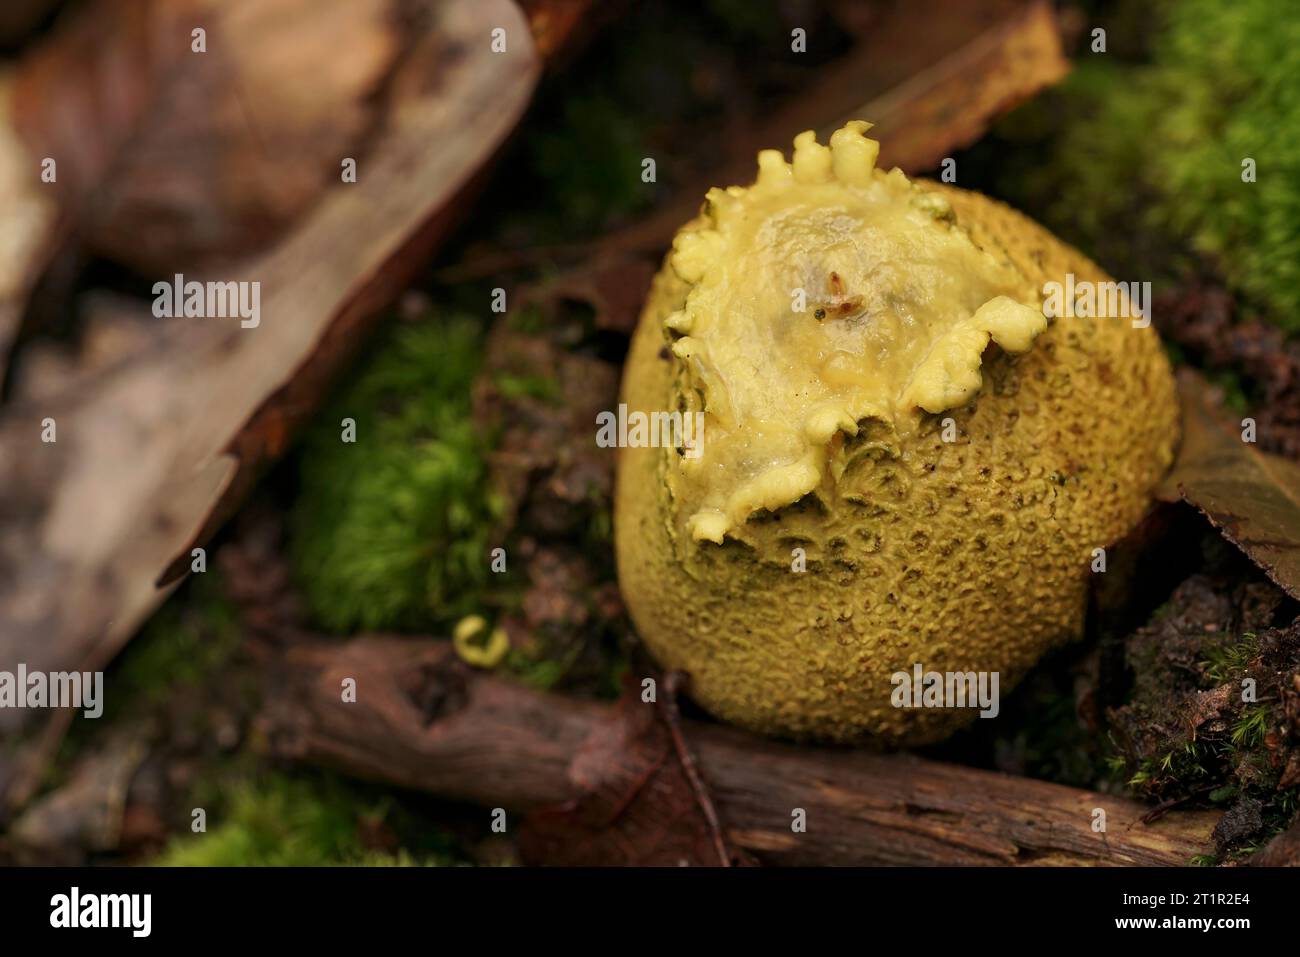 Natural closeup on the common earthball or pigskin poison puffball mushroom, Scleroderma citrinum on the forest floor Stock Photo